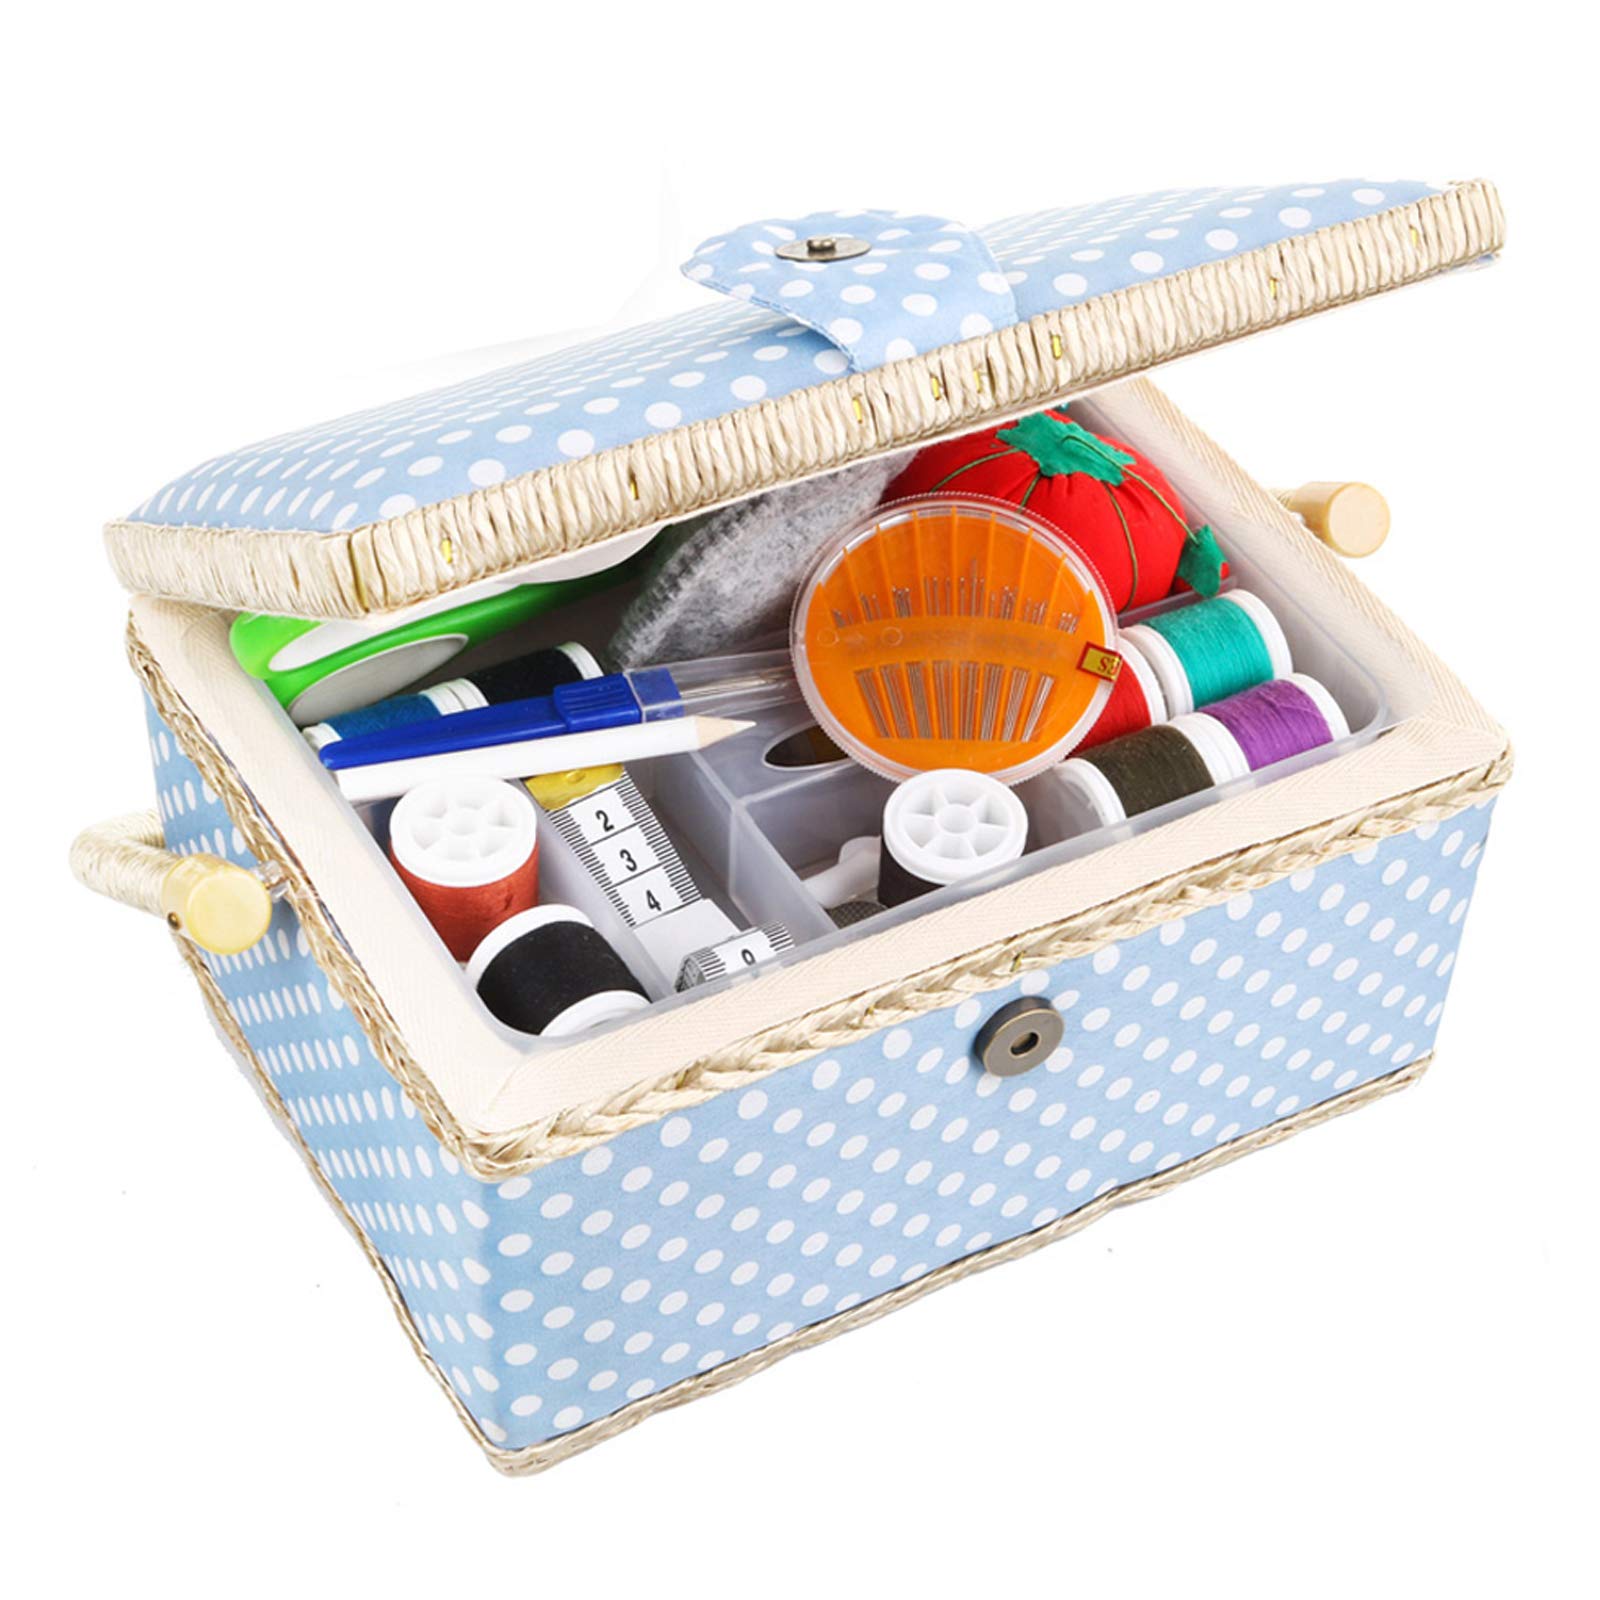 COMFECTO Basic Sewing Basket with complete Sewing Kit Accessories Included  Wooden Beginners Sewing Kits with Removable Tray and Tomato Pi